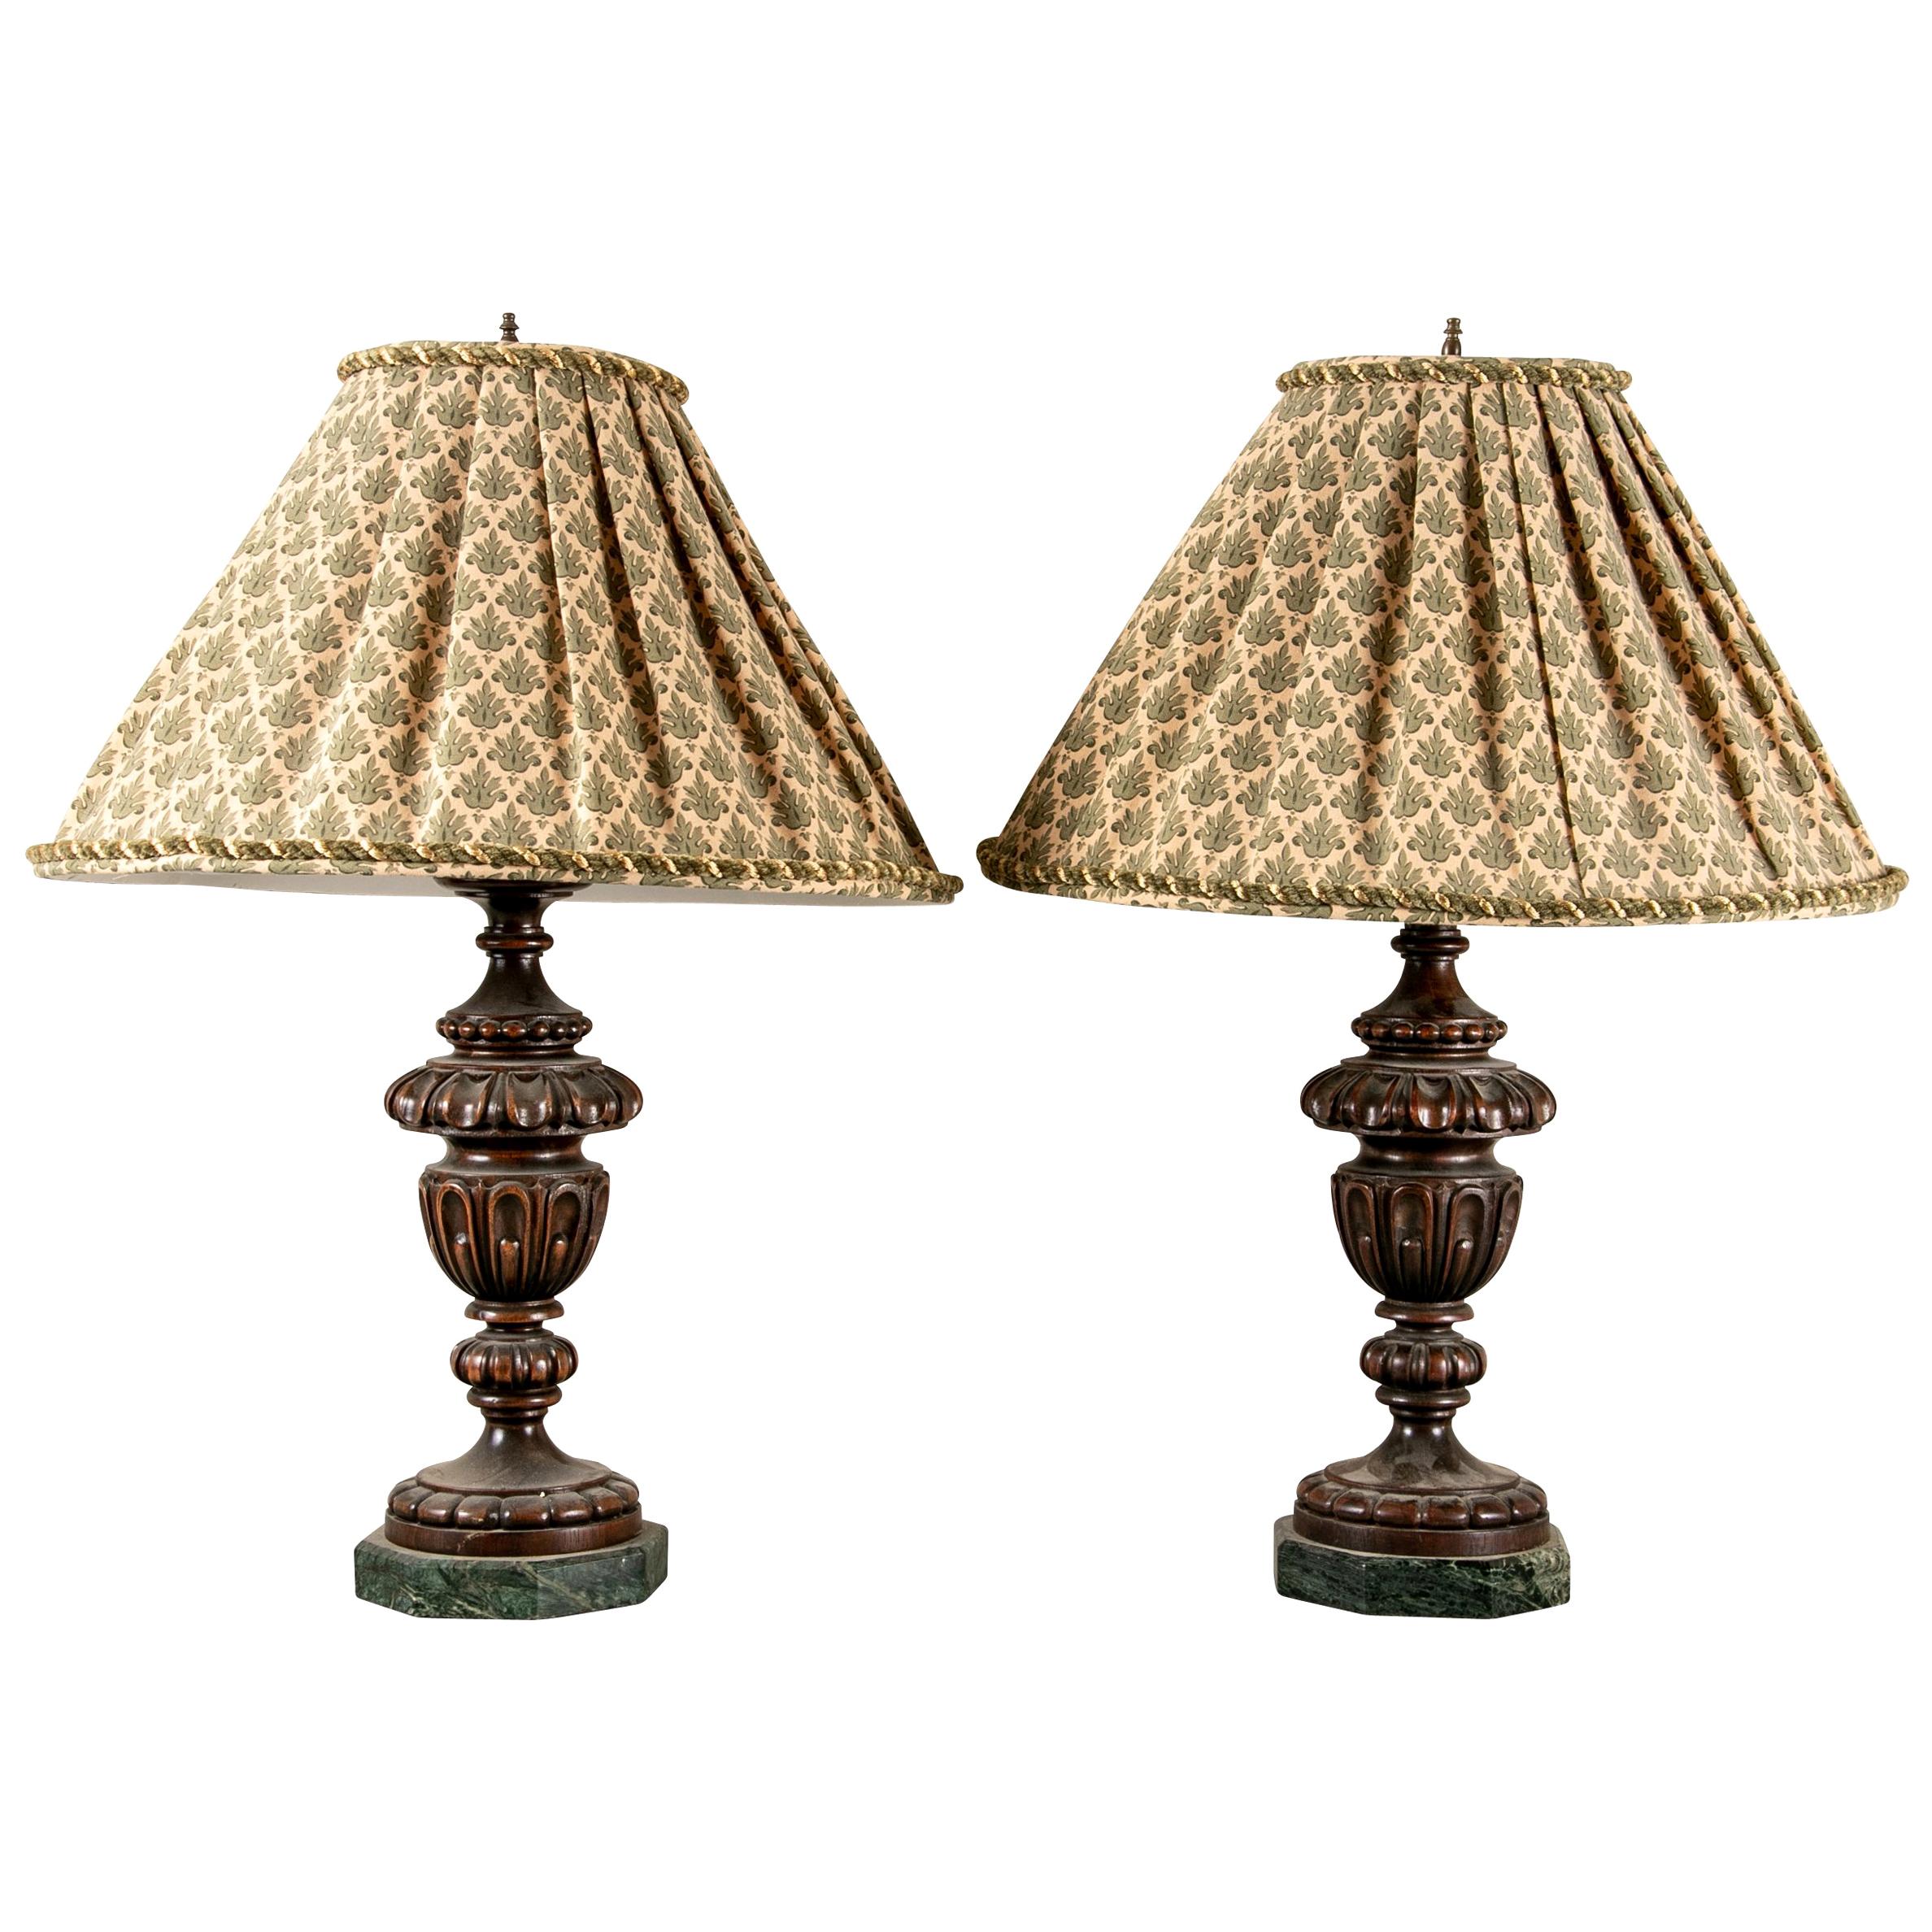 Pair of Carved Mahogany Table Lamps